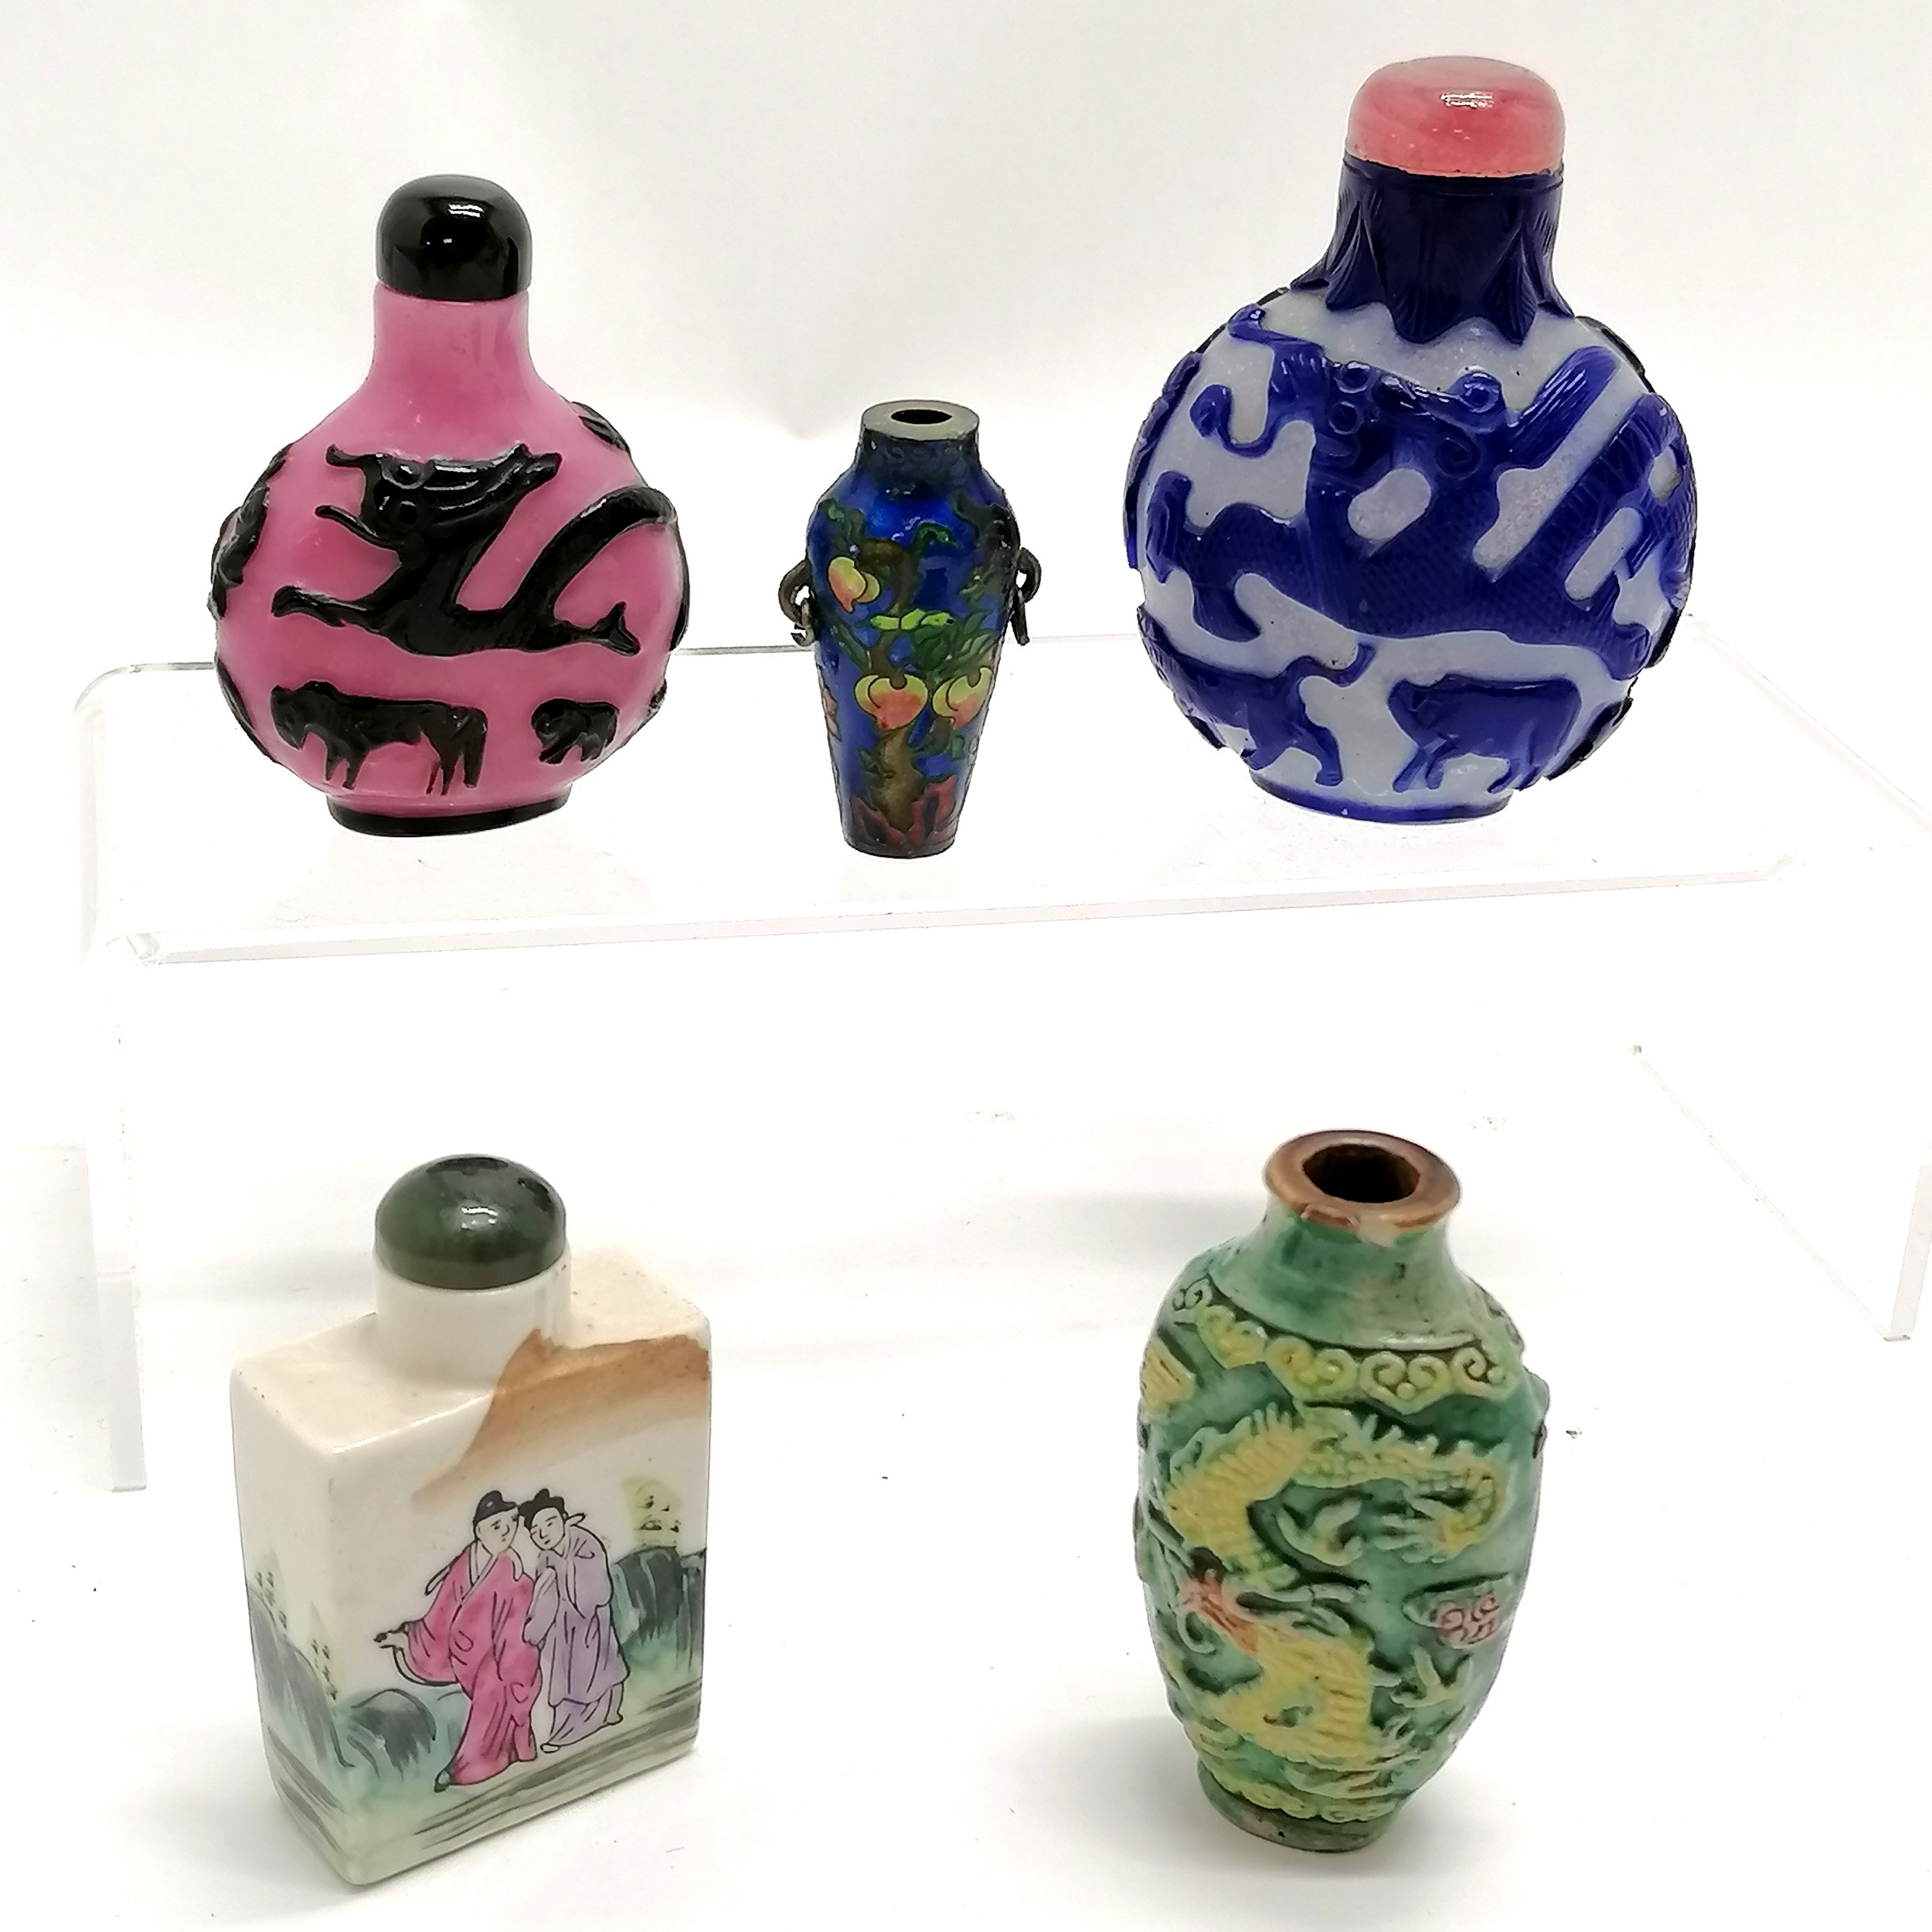 5 x Oriental Chinese snuff bottles - smallest cloisonne decorated 5cm & 2 lack stoppers ~ dragon has